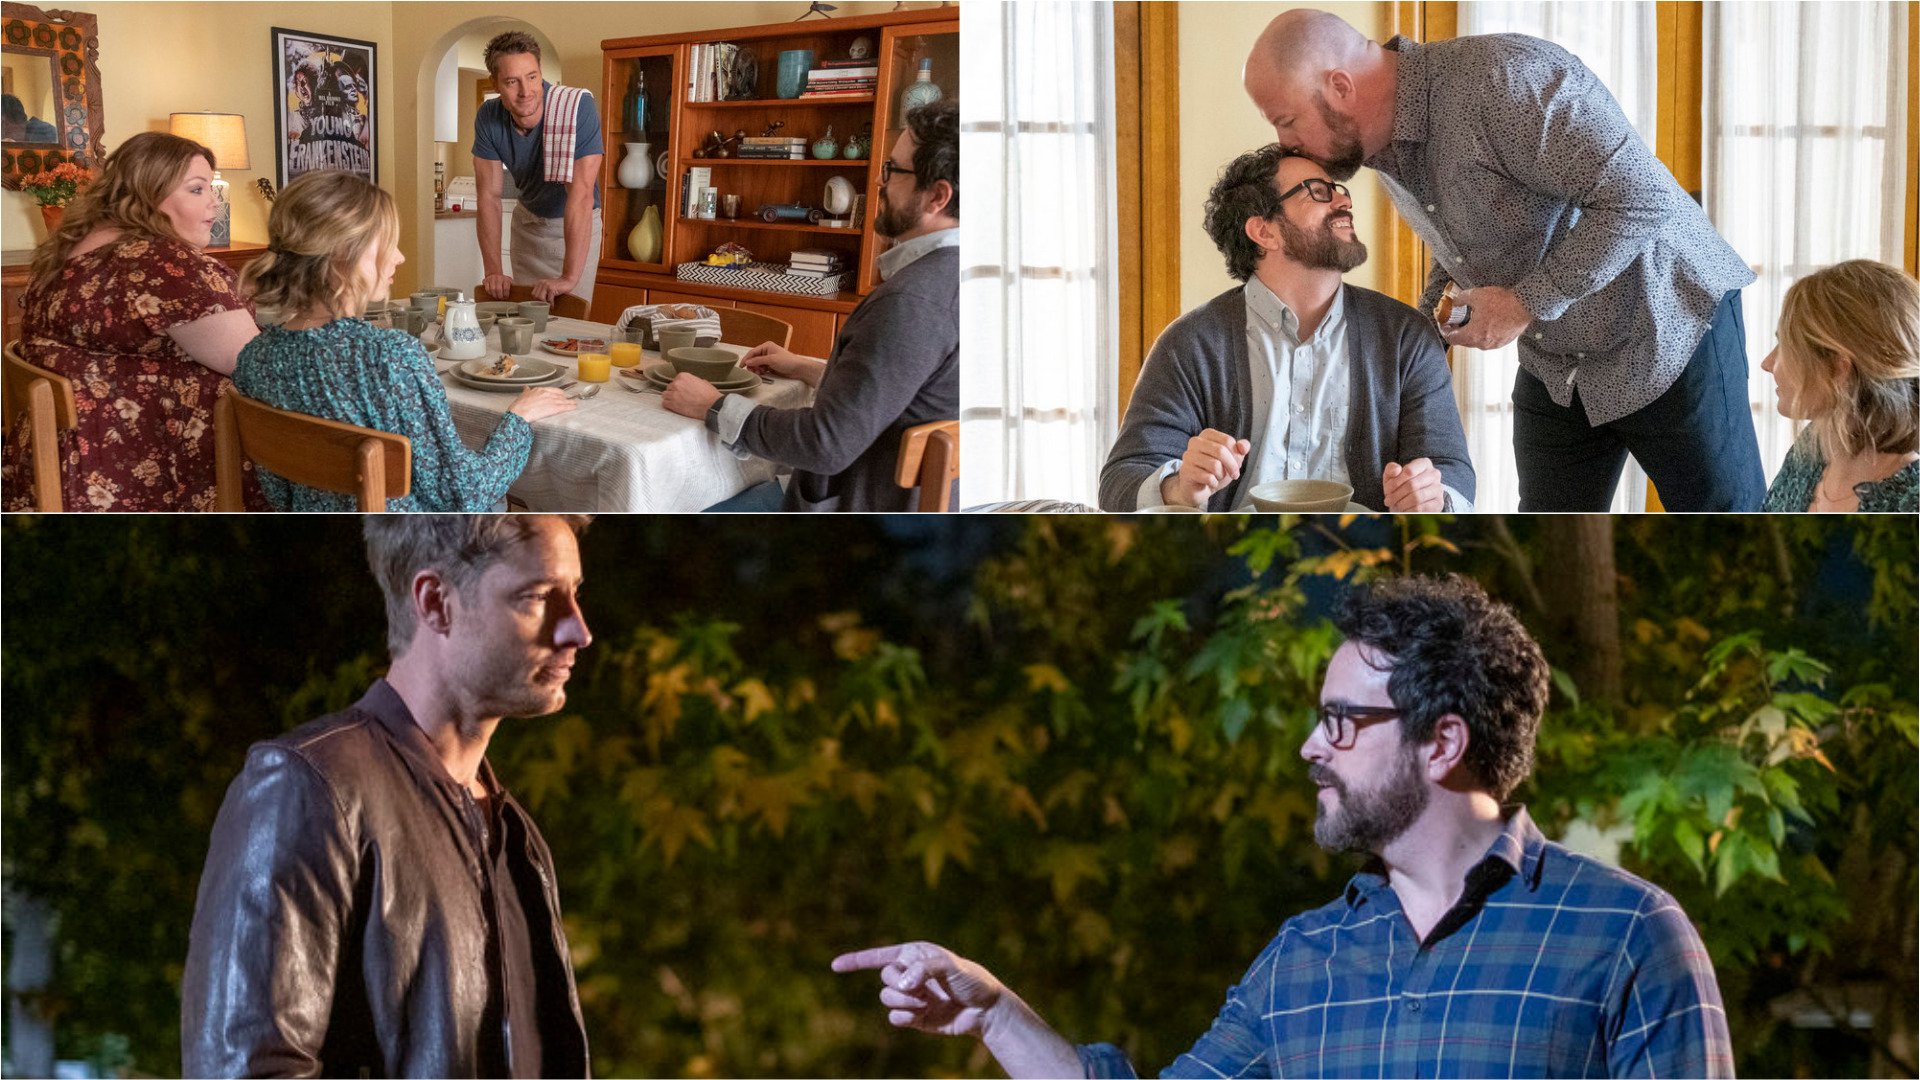 Photo collage of Justin Hartley as Kevin, Adam Korson as Elijah, Chrissy Metz as Kate, Caitlin Thompson as Madison, and Chris Sullivan as Toby in ‘This Is Us’ Season 6 Episode 6